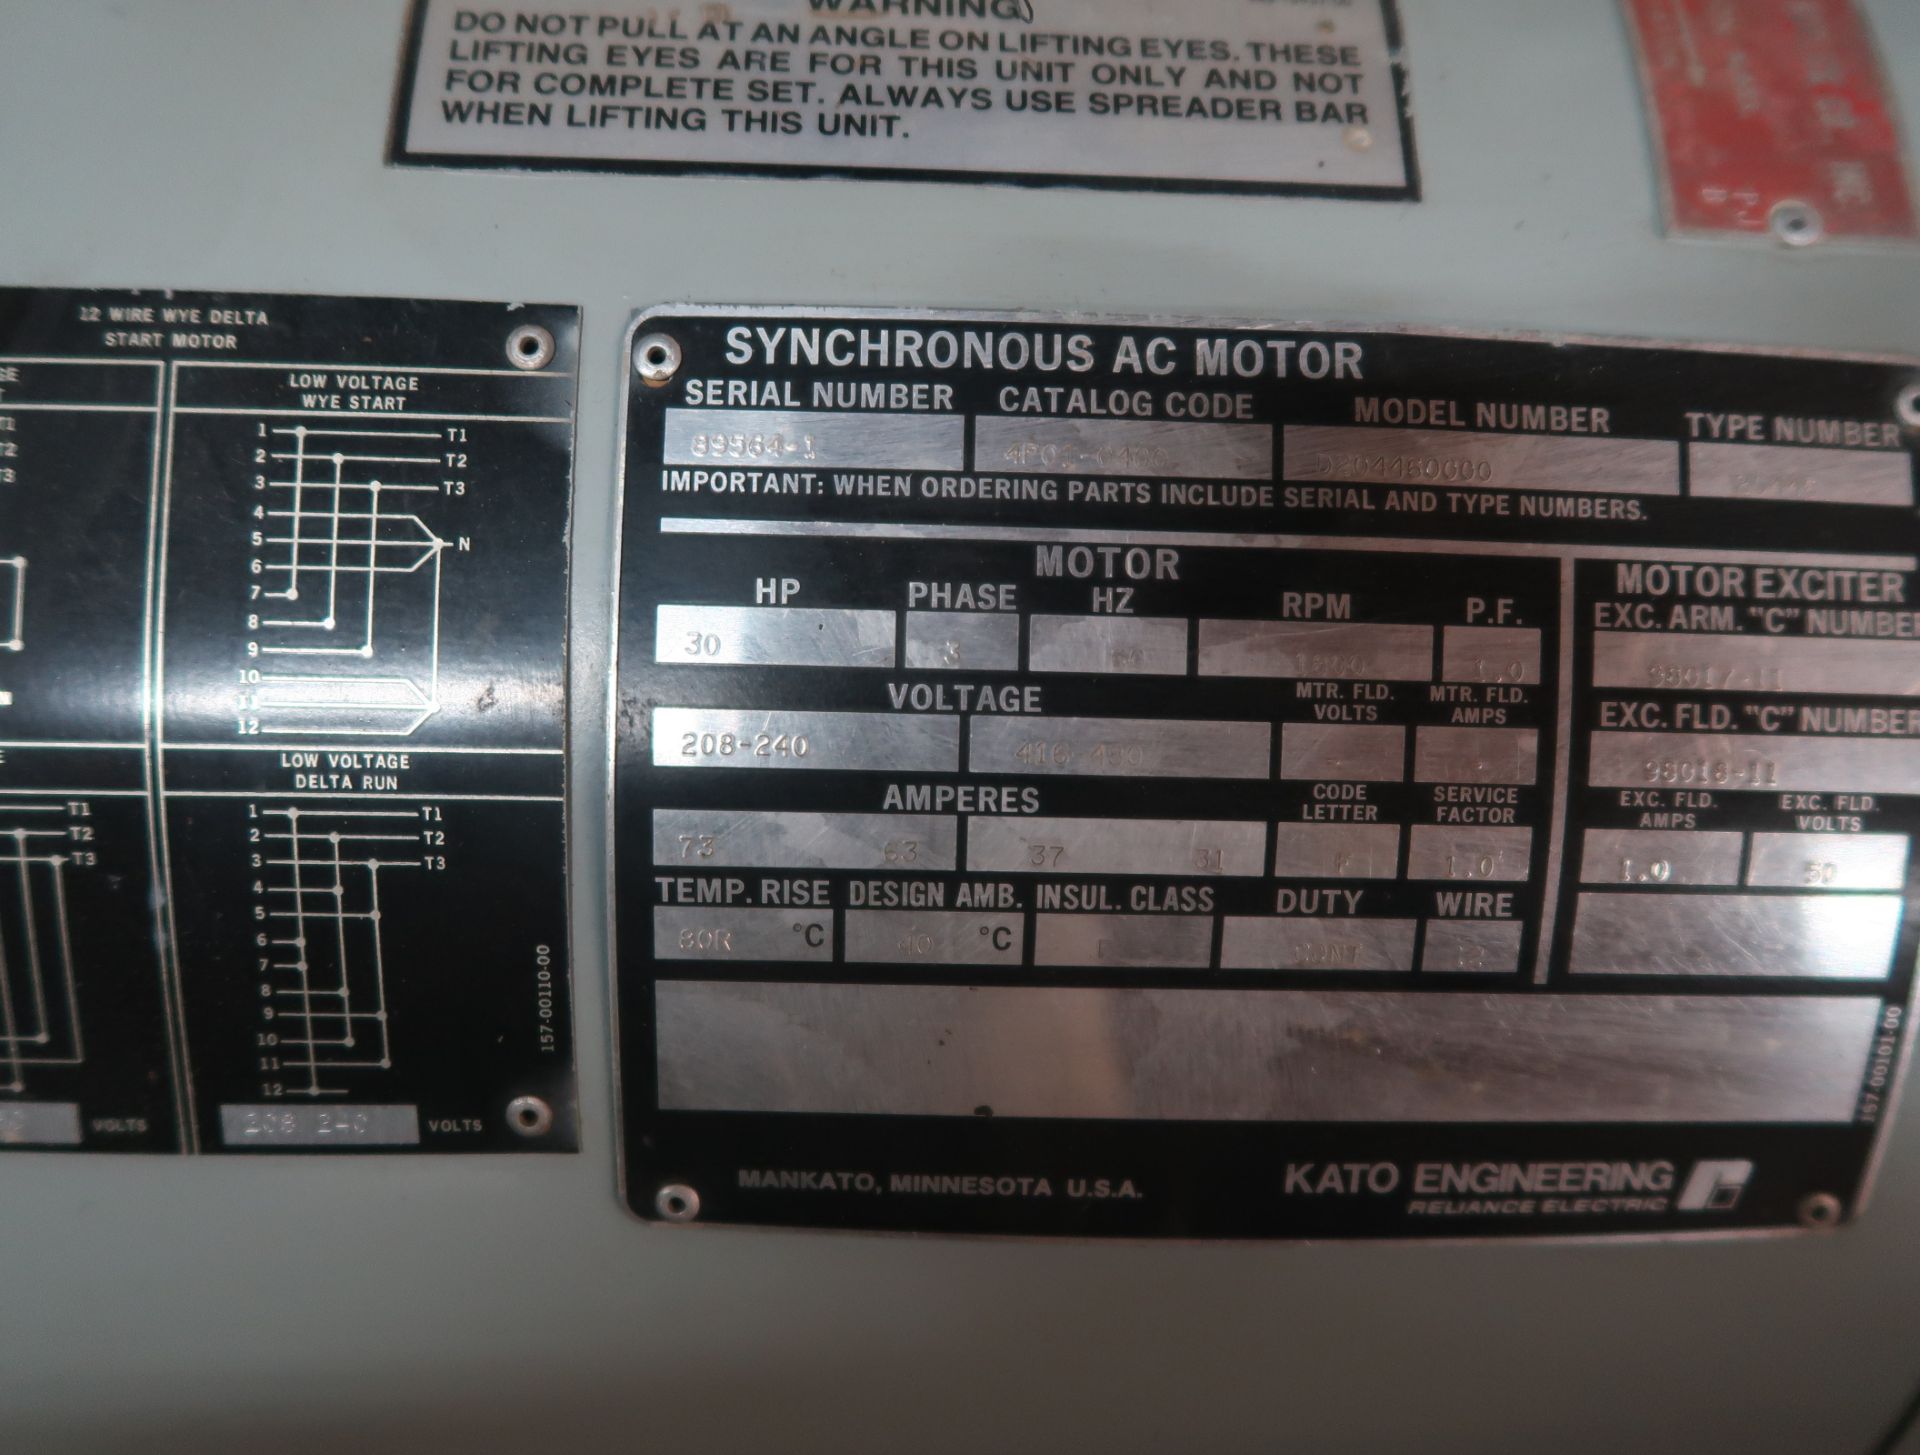 A.C. GENERATOR BRUSHLESS SYNCHRONOUS ALTERNATOR MDL. 20EX9E W/CONTROL PANEL - Image 4 of 5